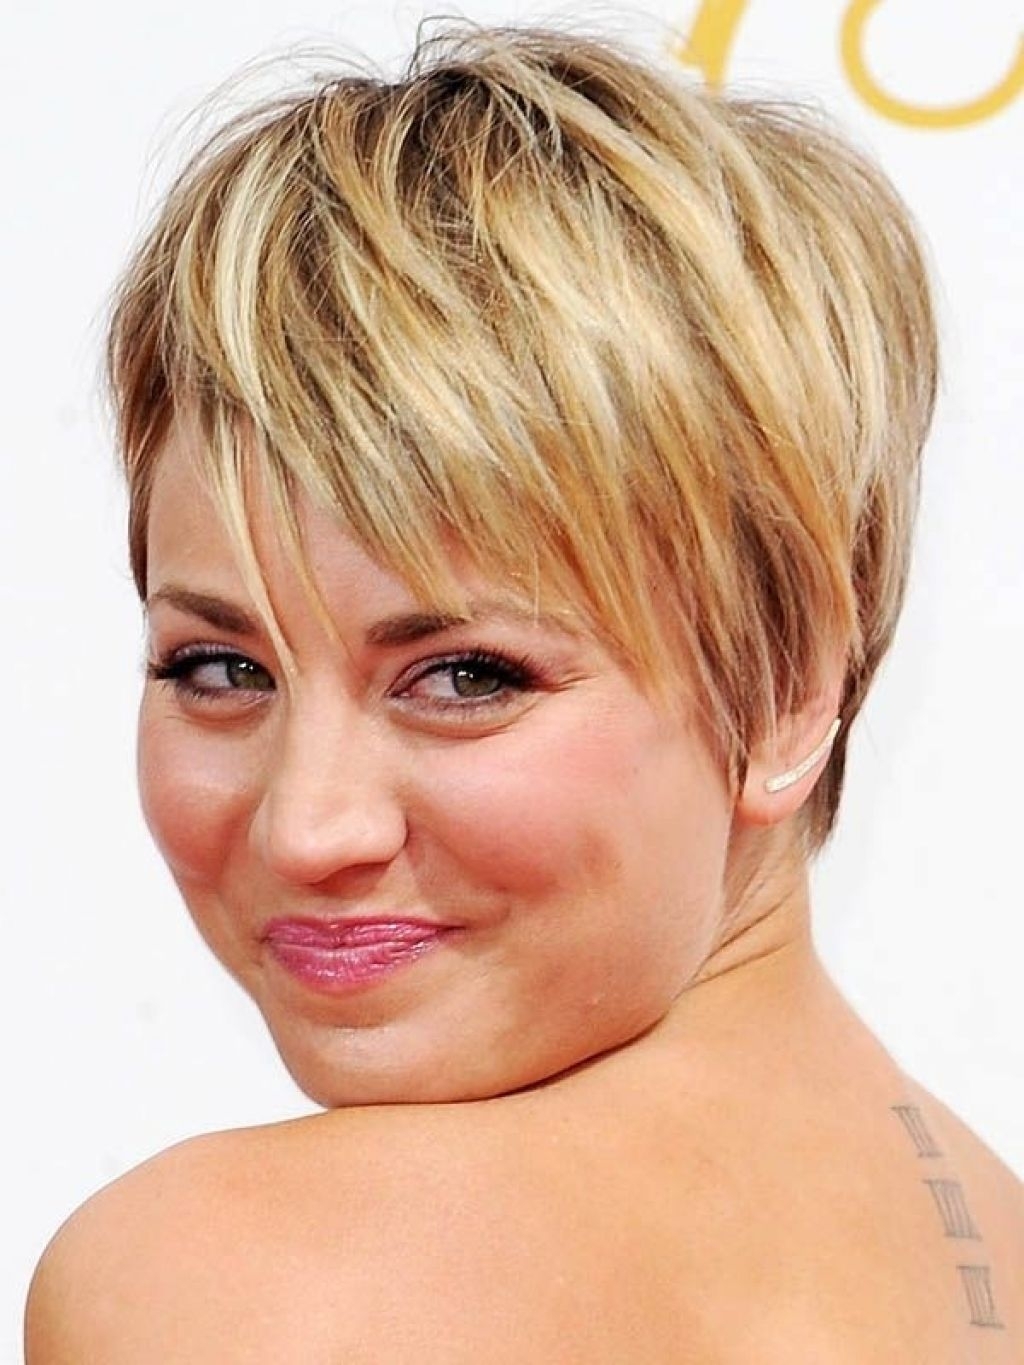 18 Outstanding Hairstyles For Round Long And Fat Faces – HairStyles for ...